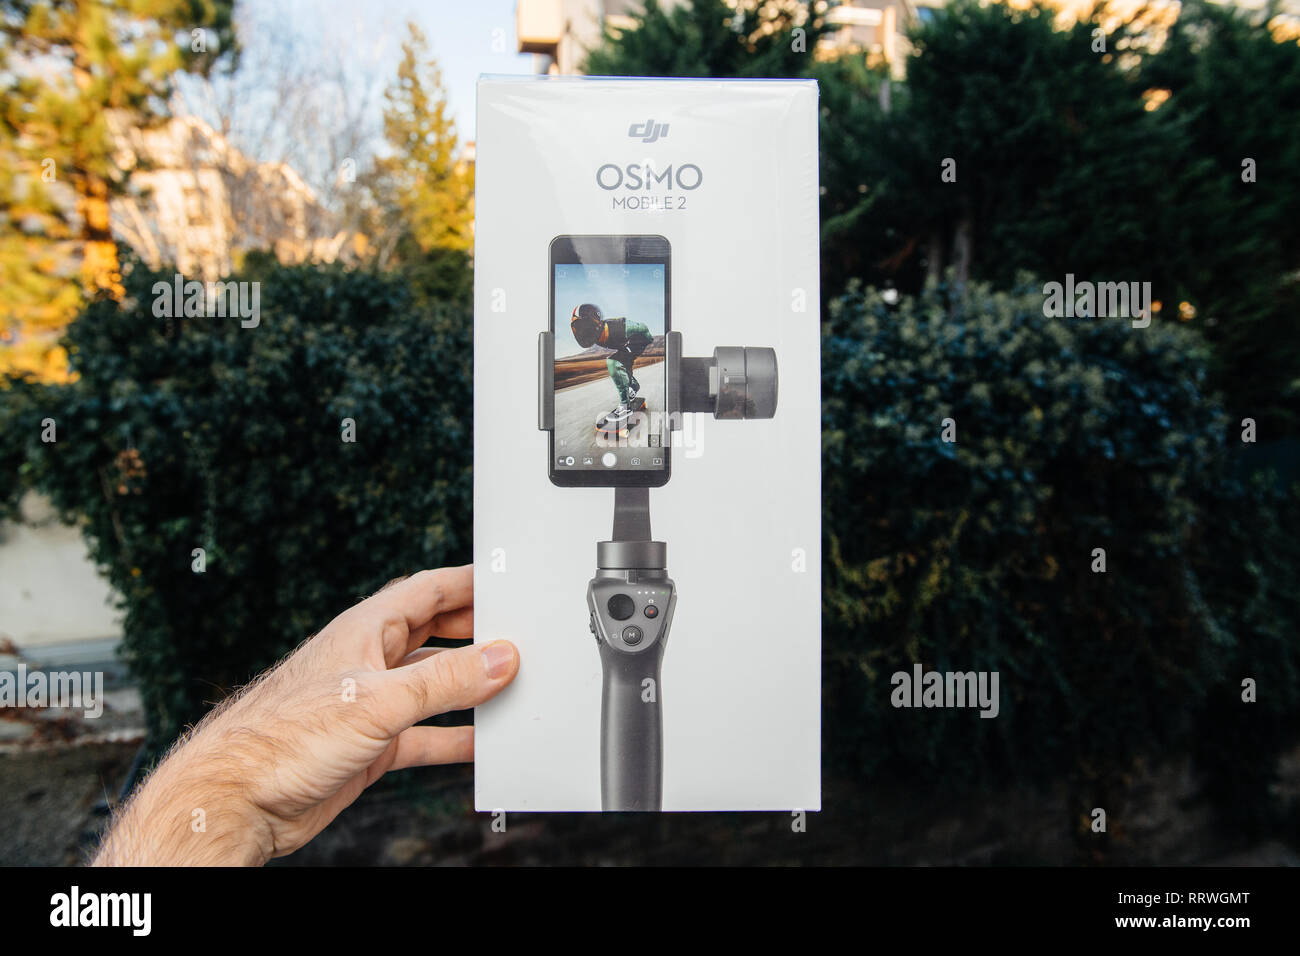 PARIS, FRANCE - NOV 22, 2018: Man hand holding in outdoor background new DJI Osmo Mobile 2 Smartphone Gimbal manufactured by the SZ DJI Technology Co., Ltd company horizontal Stock Photo